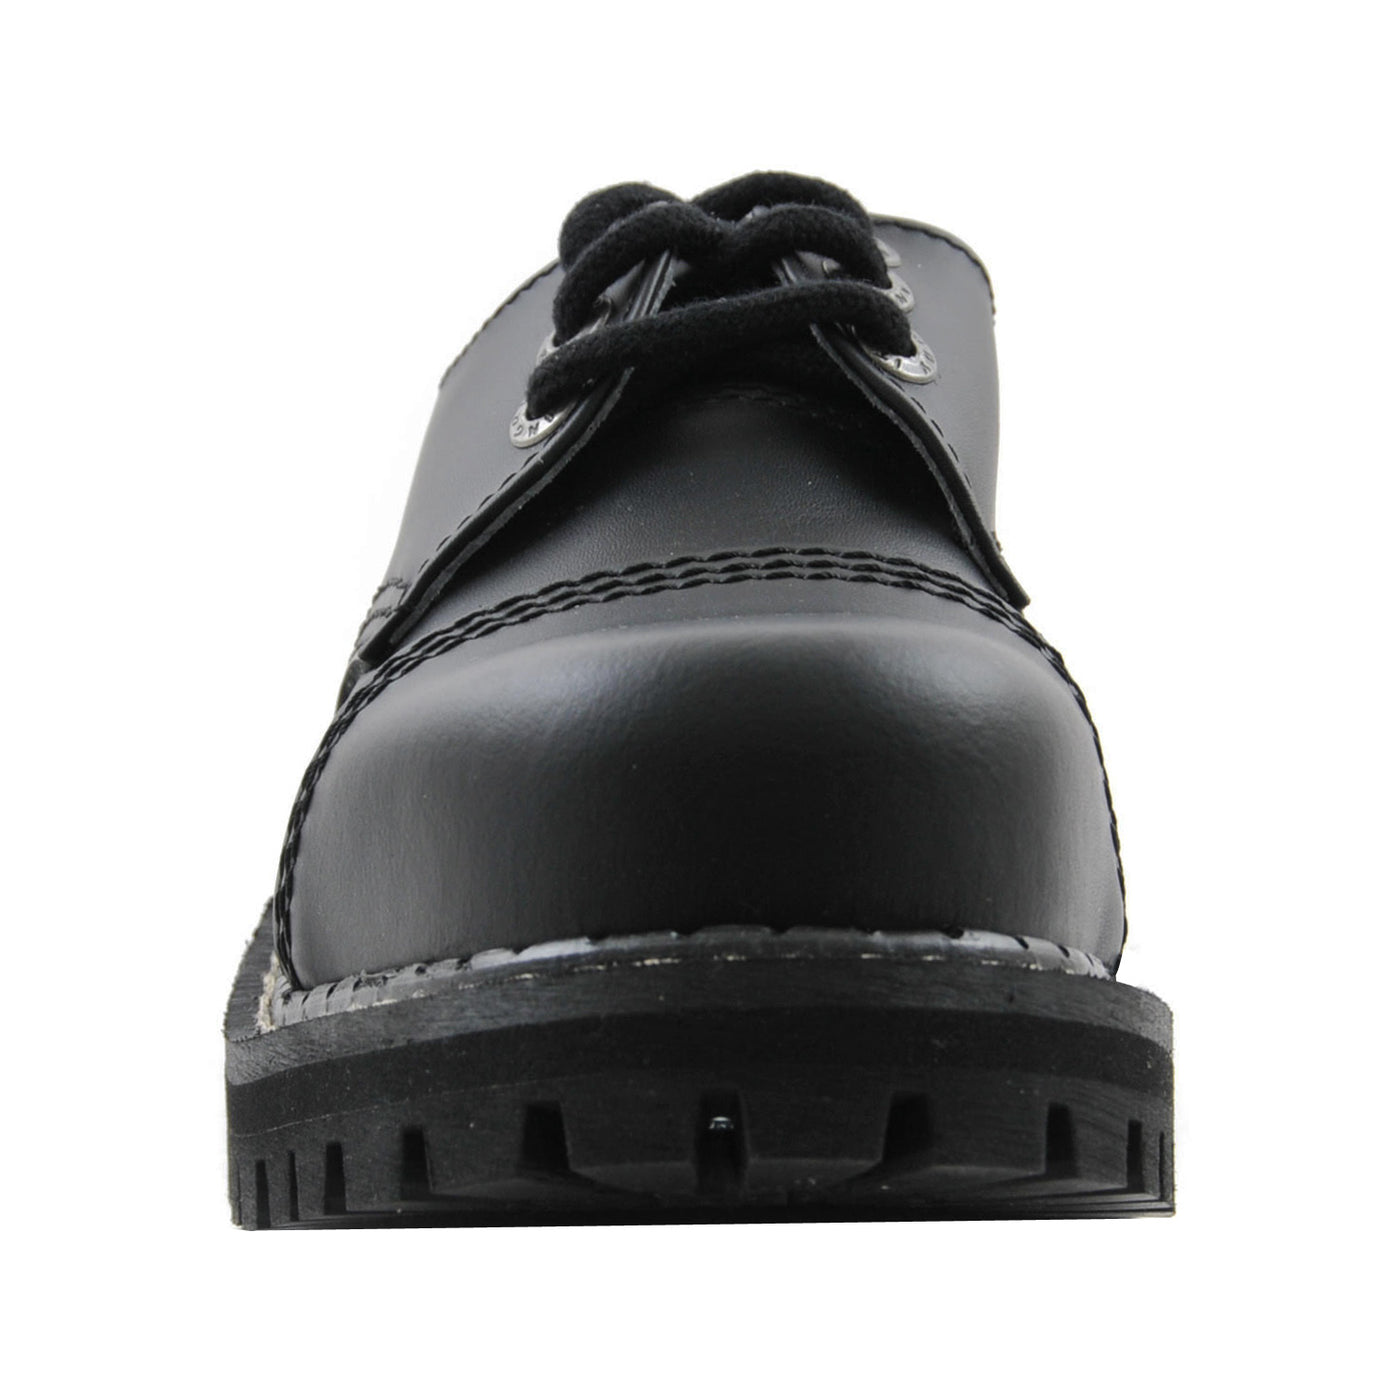 Angry Itch 3 Eyelet Shoes with Steel Toe Cap Black Leather